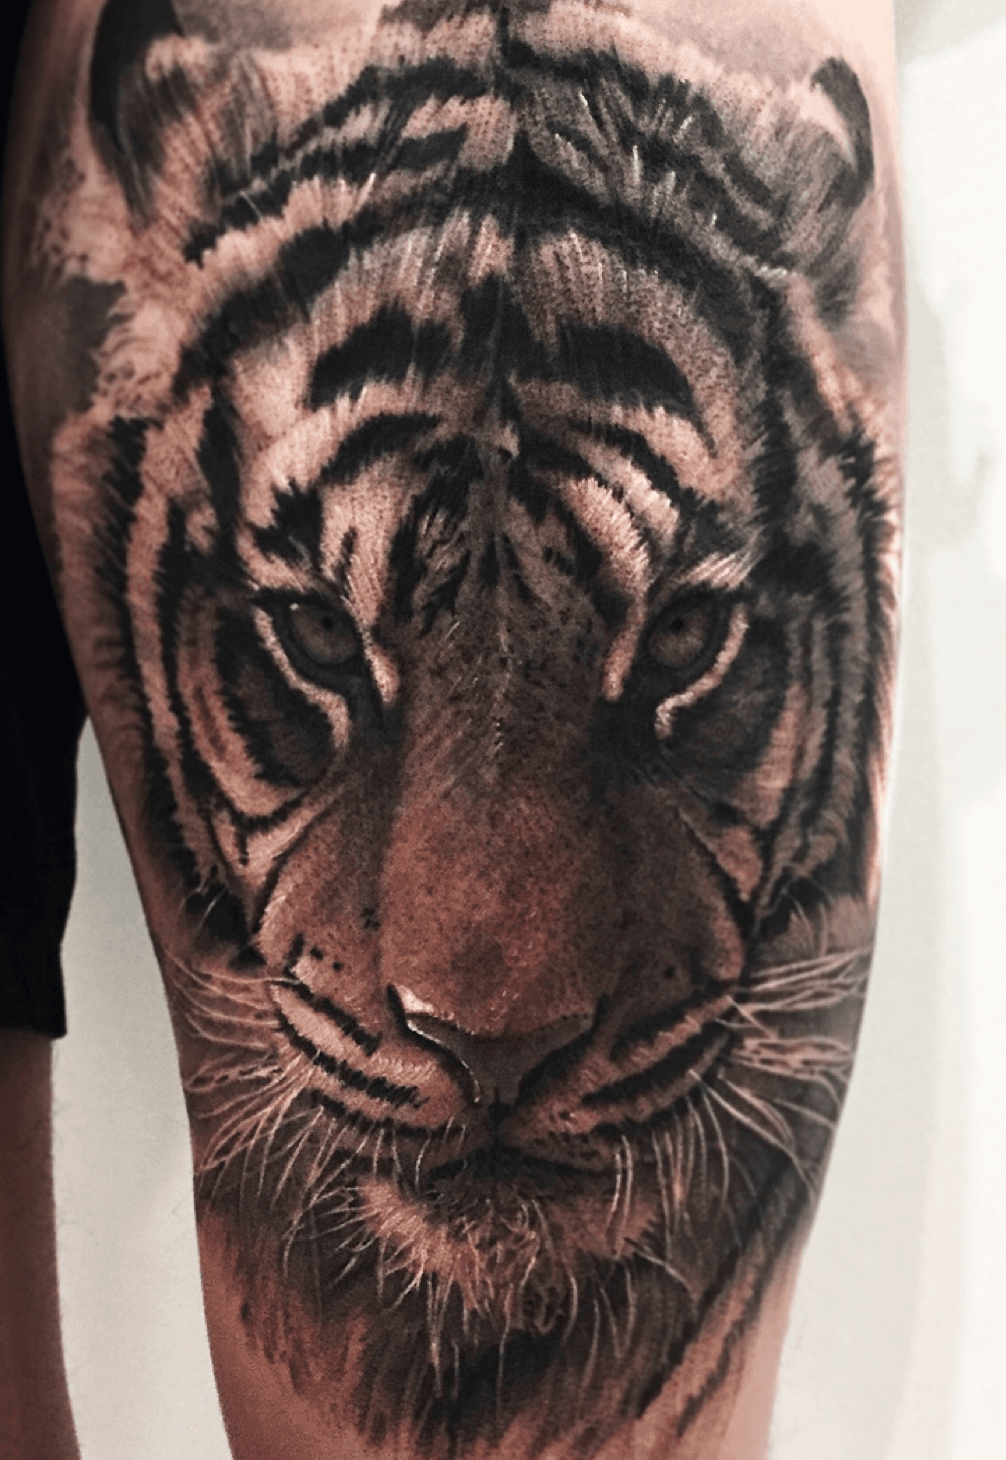 Tattoo uploaded by Blackfeel • The realistic tiger portrait reference on  the thigh • Tattoodo